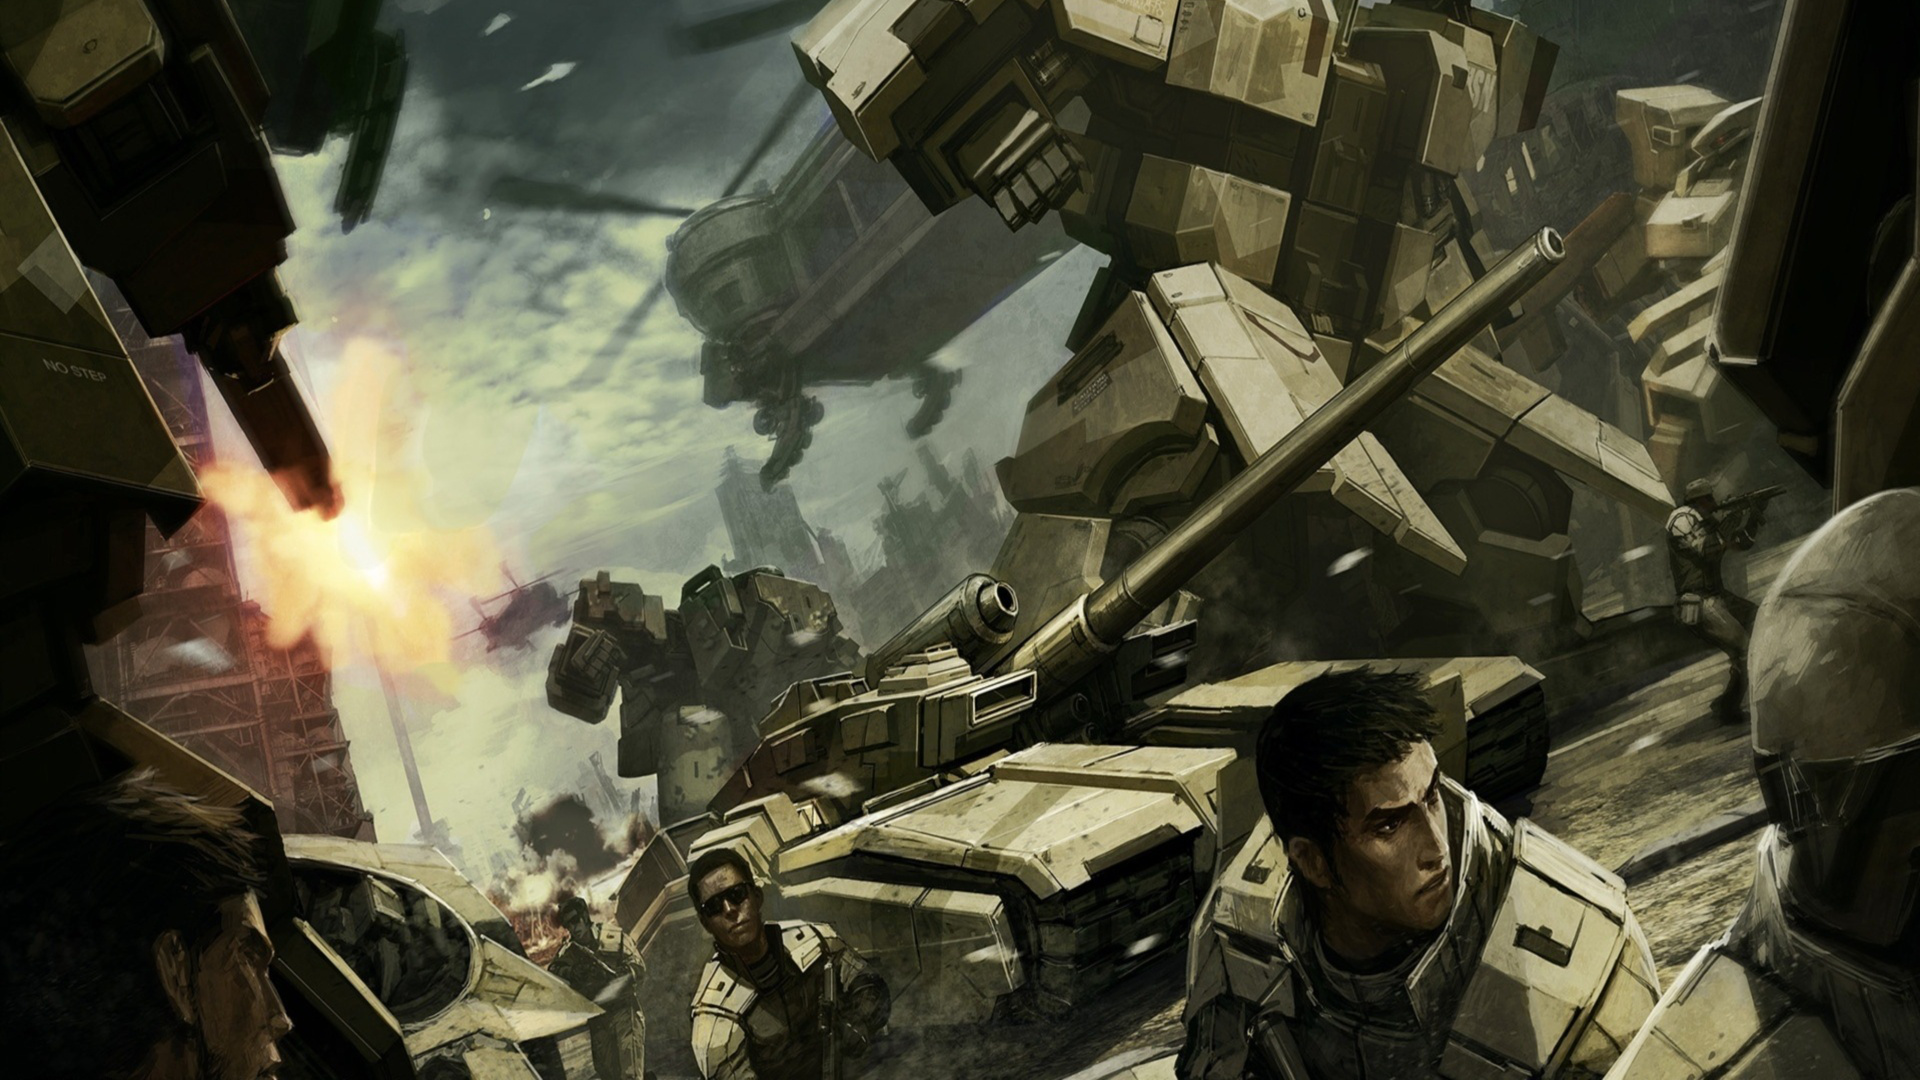 Front Mission 3 HD wallpapers, Desktop wallpaper - most viewed